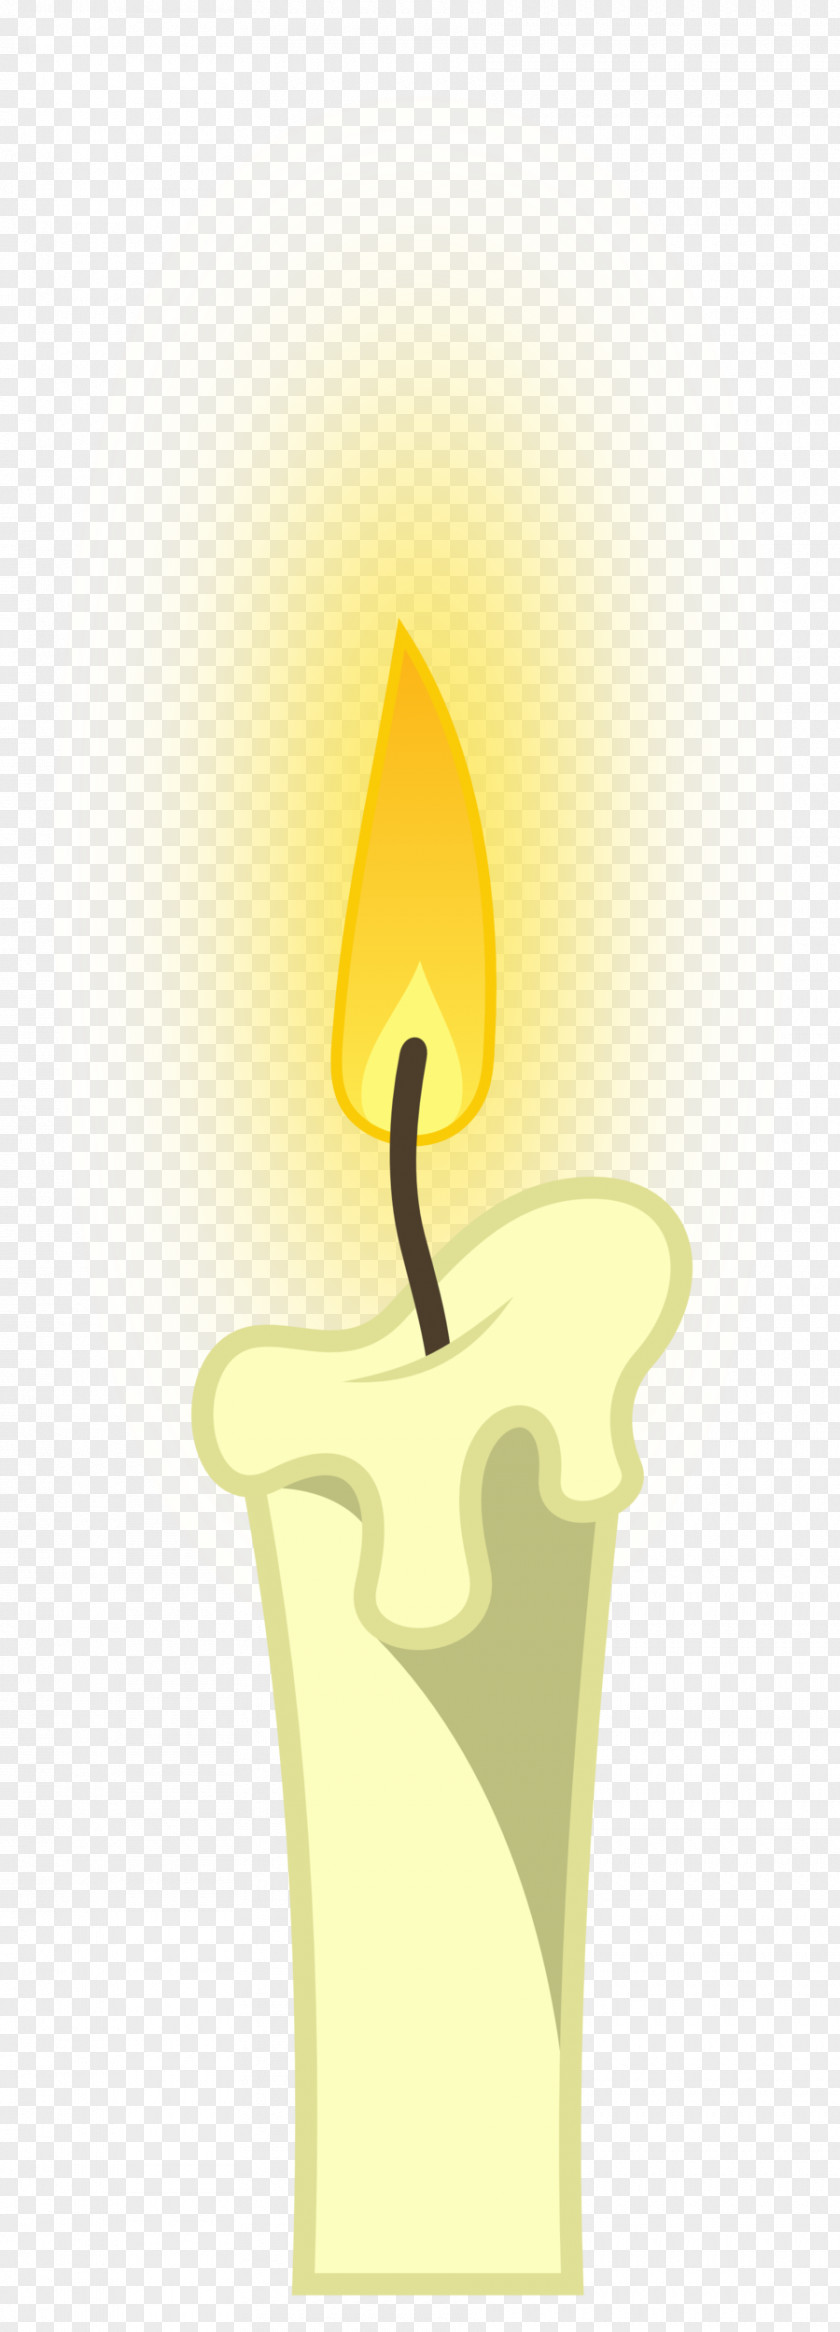 Candle Derpy Hooves Pony Clip Art PNG